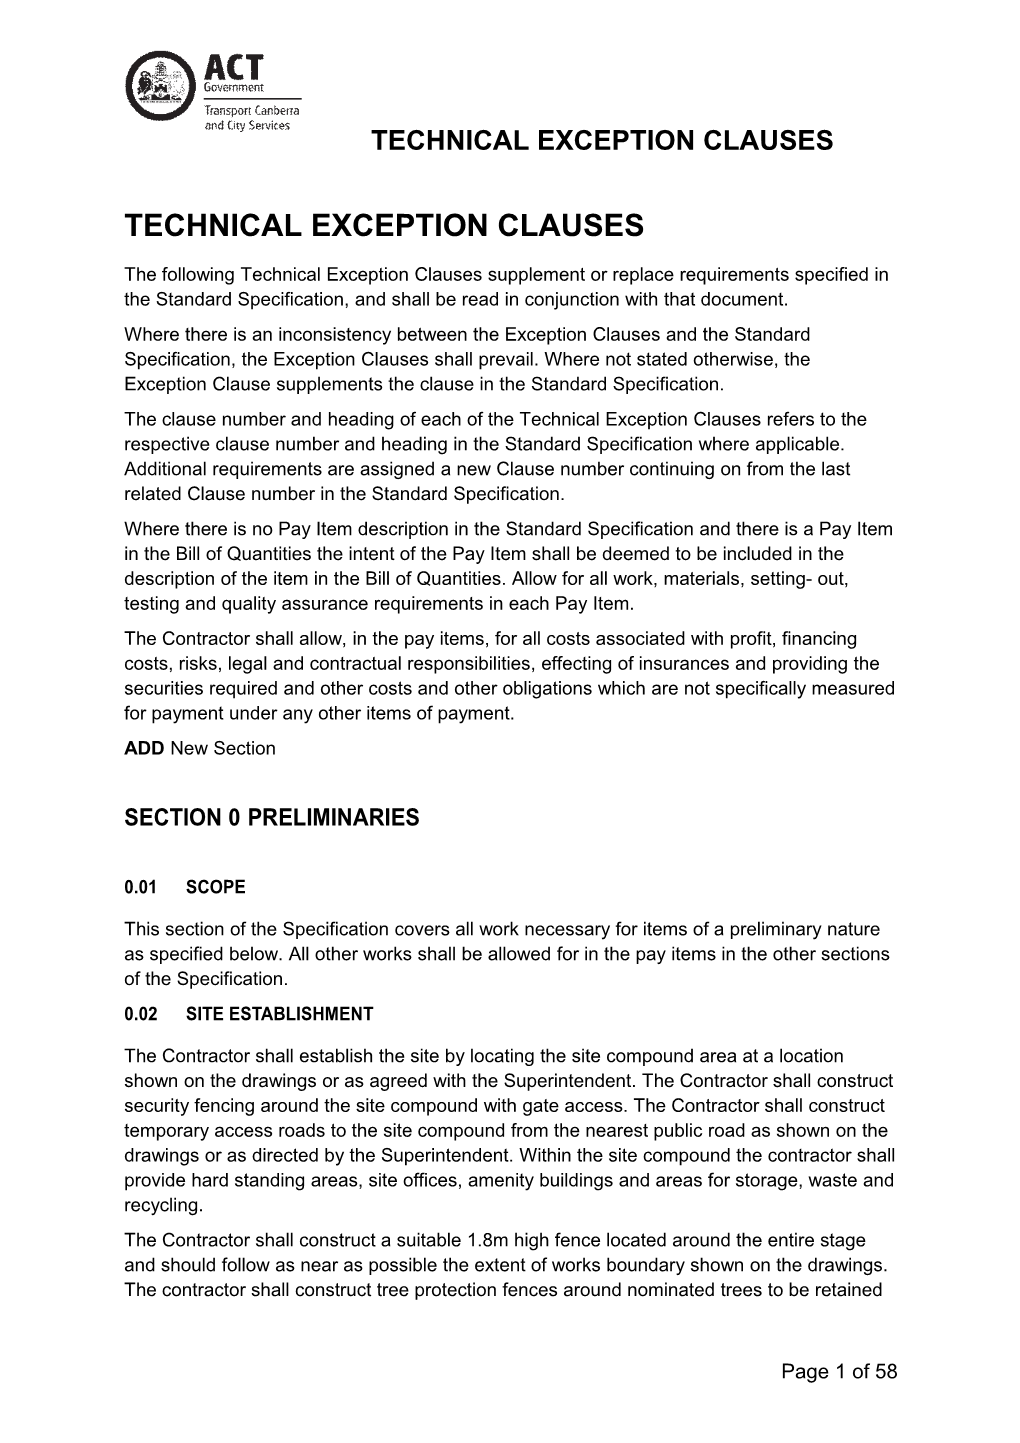 Technical Exception Clauses